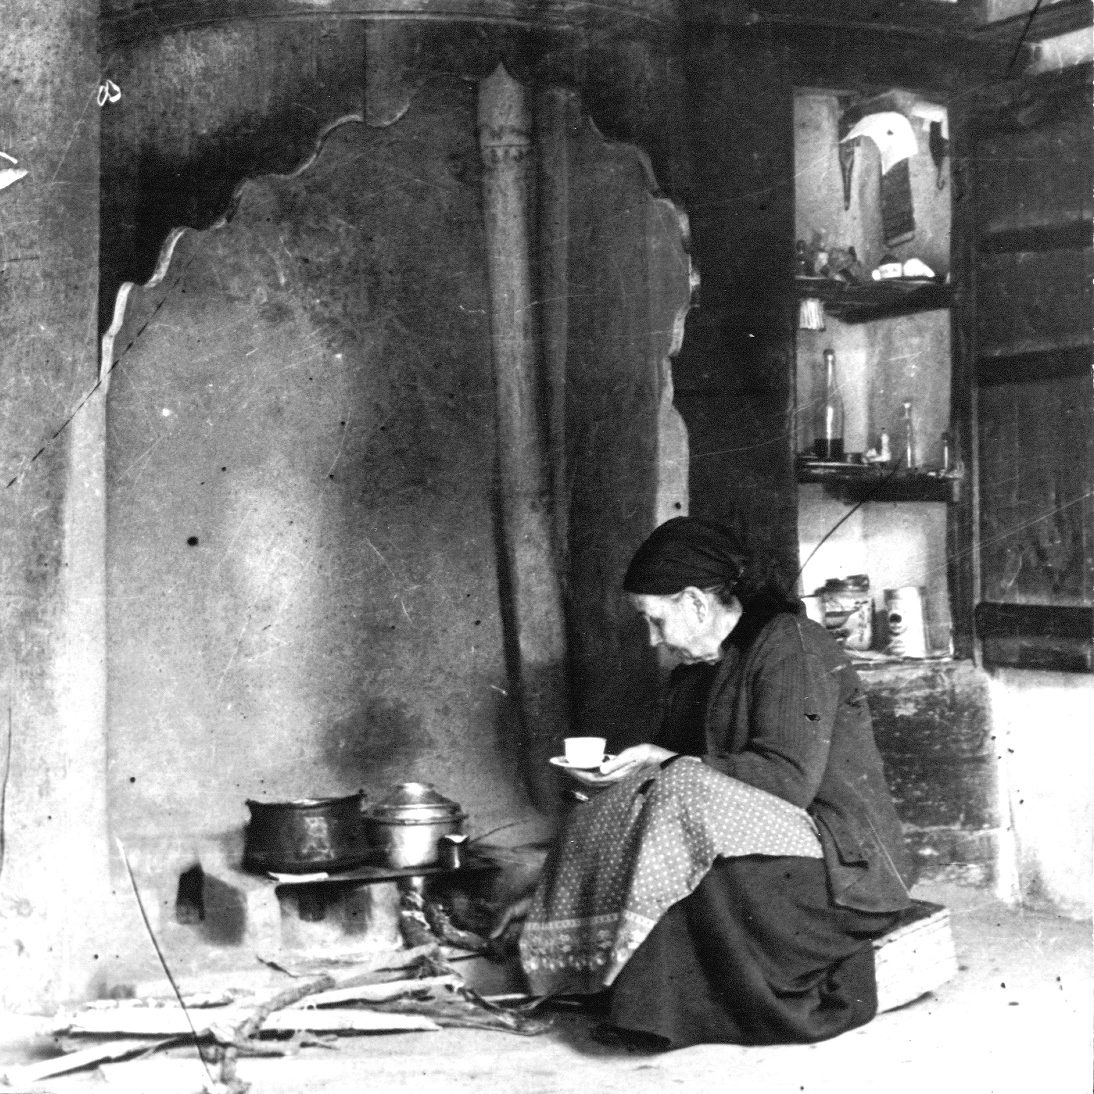 Woman cooking on a hearth - black and white photo.